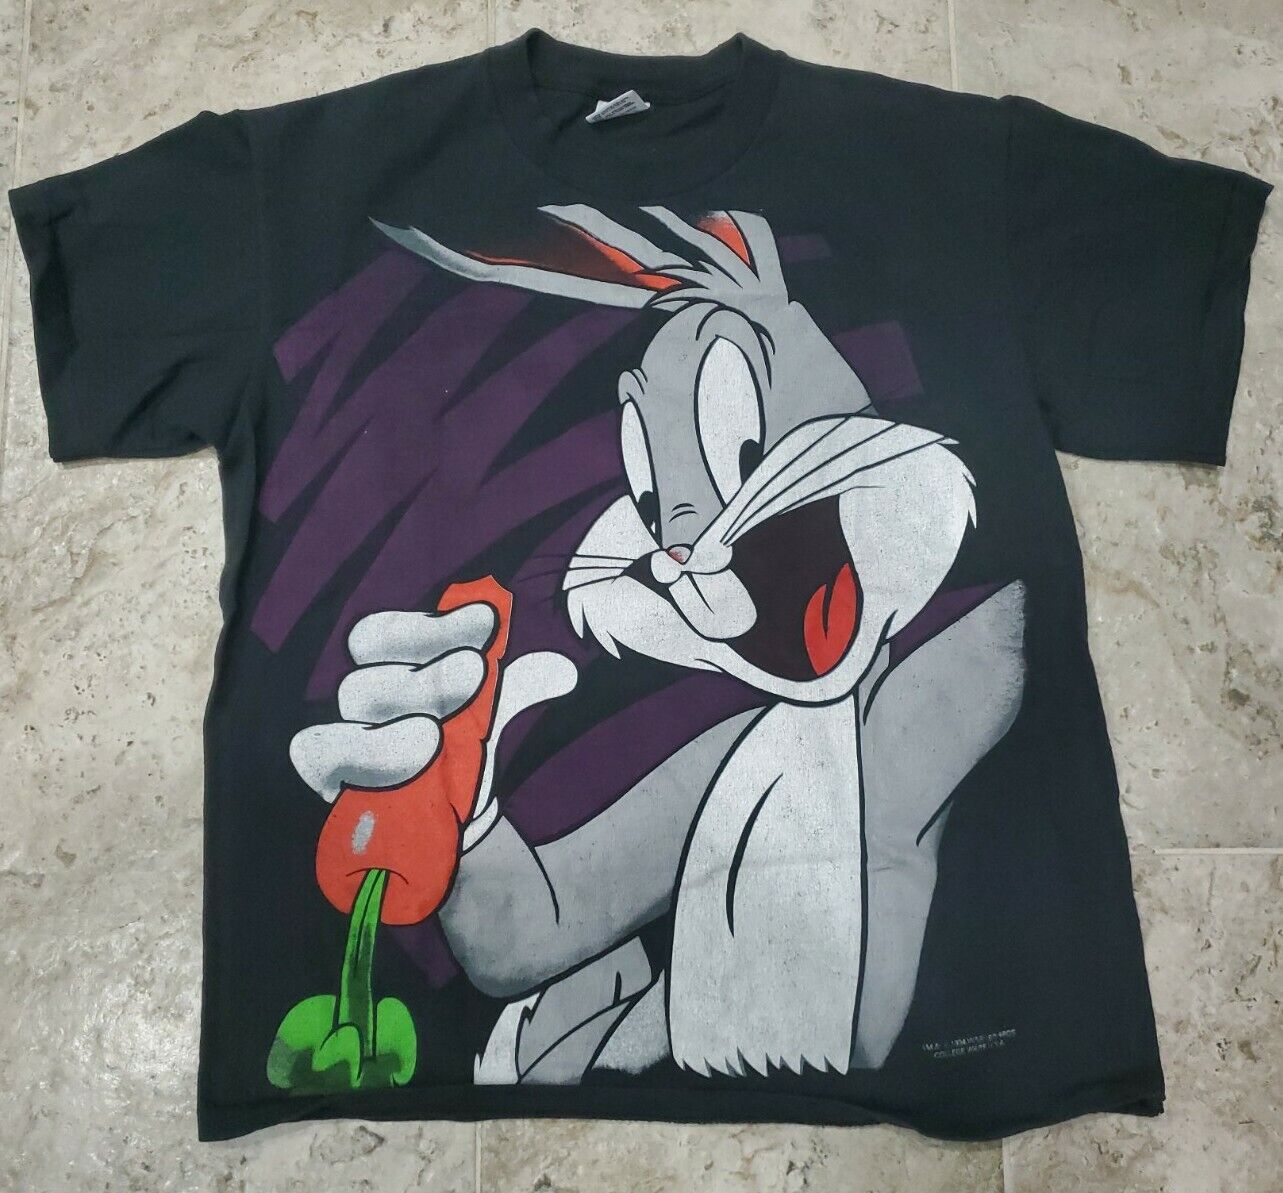 VINTAGE 1994 COLLEGEWARE USA BUGS BUNNY ALL OVER T-SHIRT MEN'S SIZE LARGE  HTF!!!